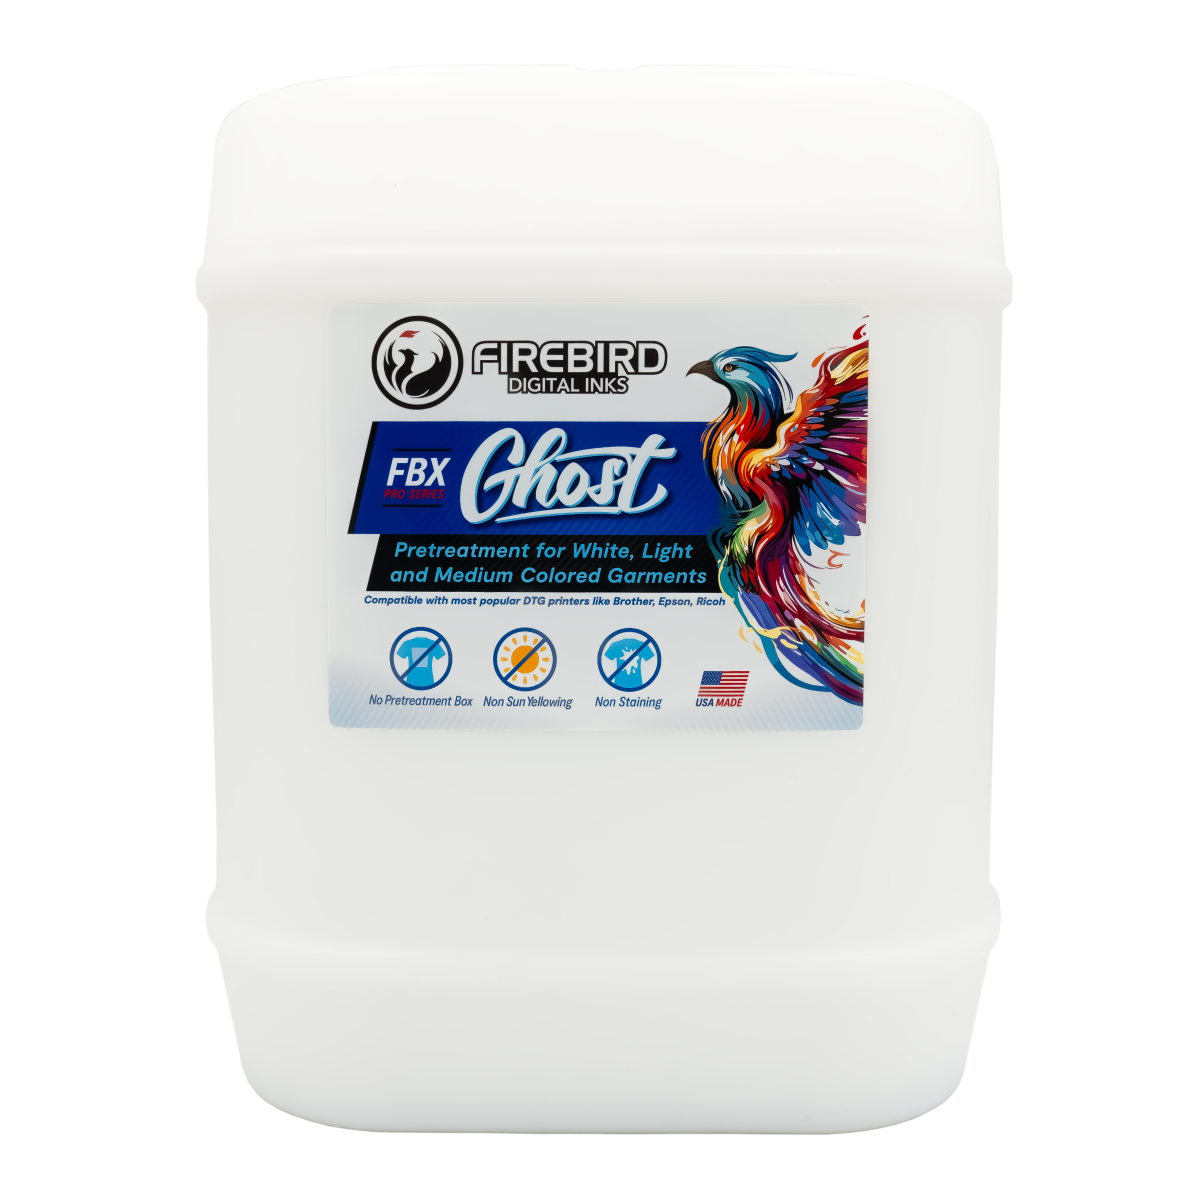 FBX Ghost DTG Pretreatment for White, Light and Medium Colored Garments - 5 Gallons